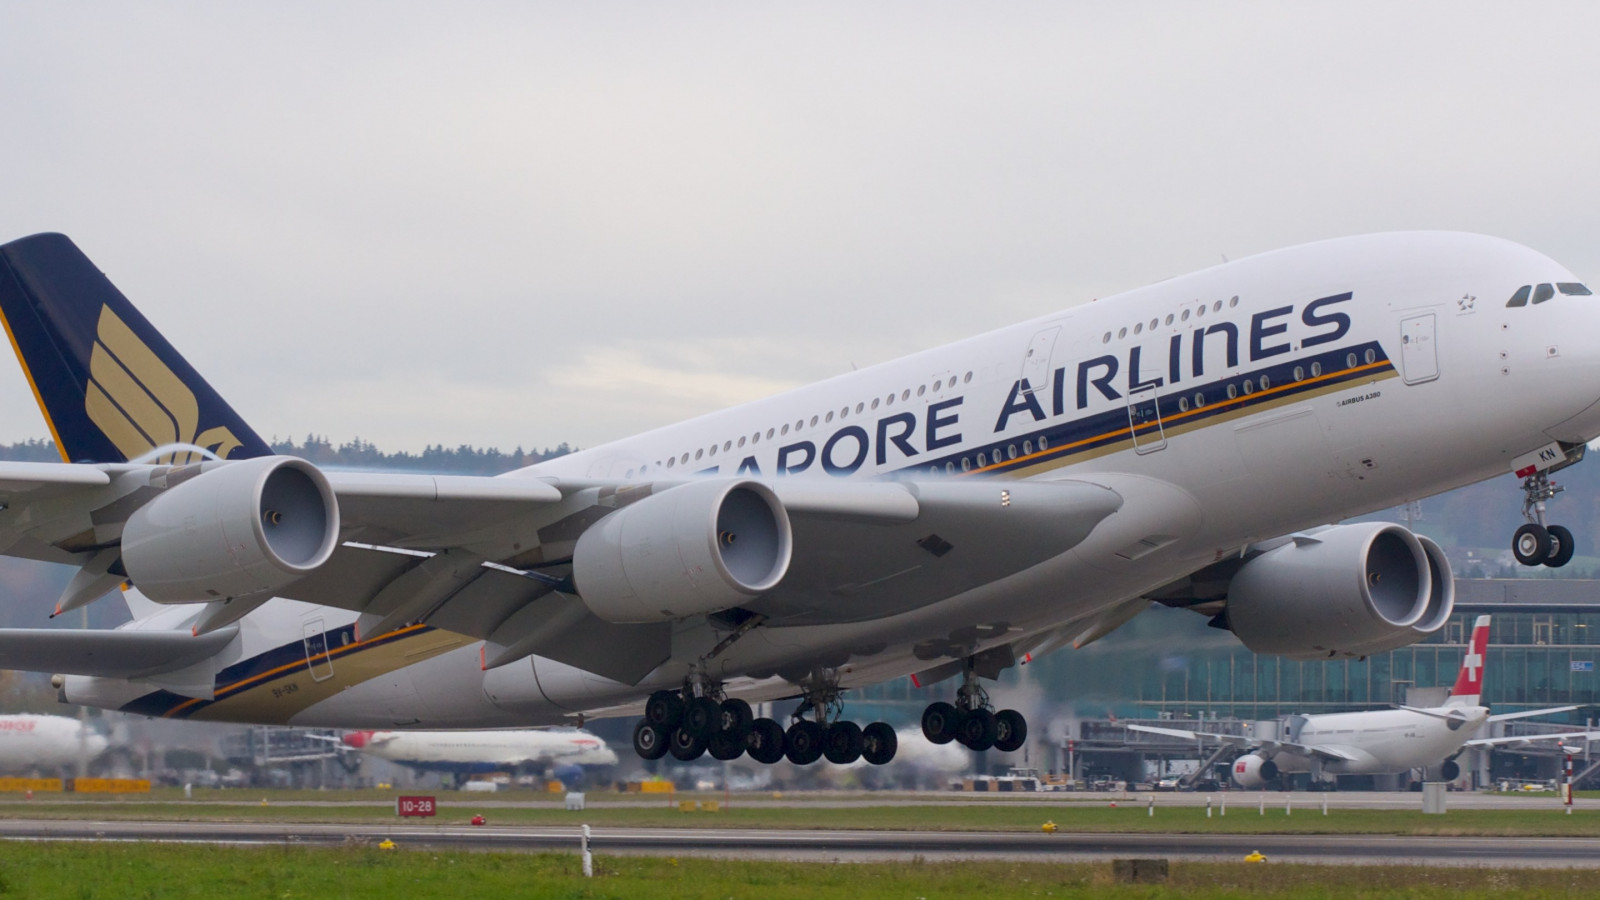 Passenger airplane from Singapore airlines wallpaper 1600x900